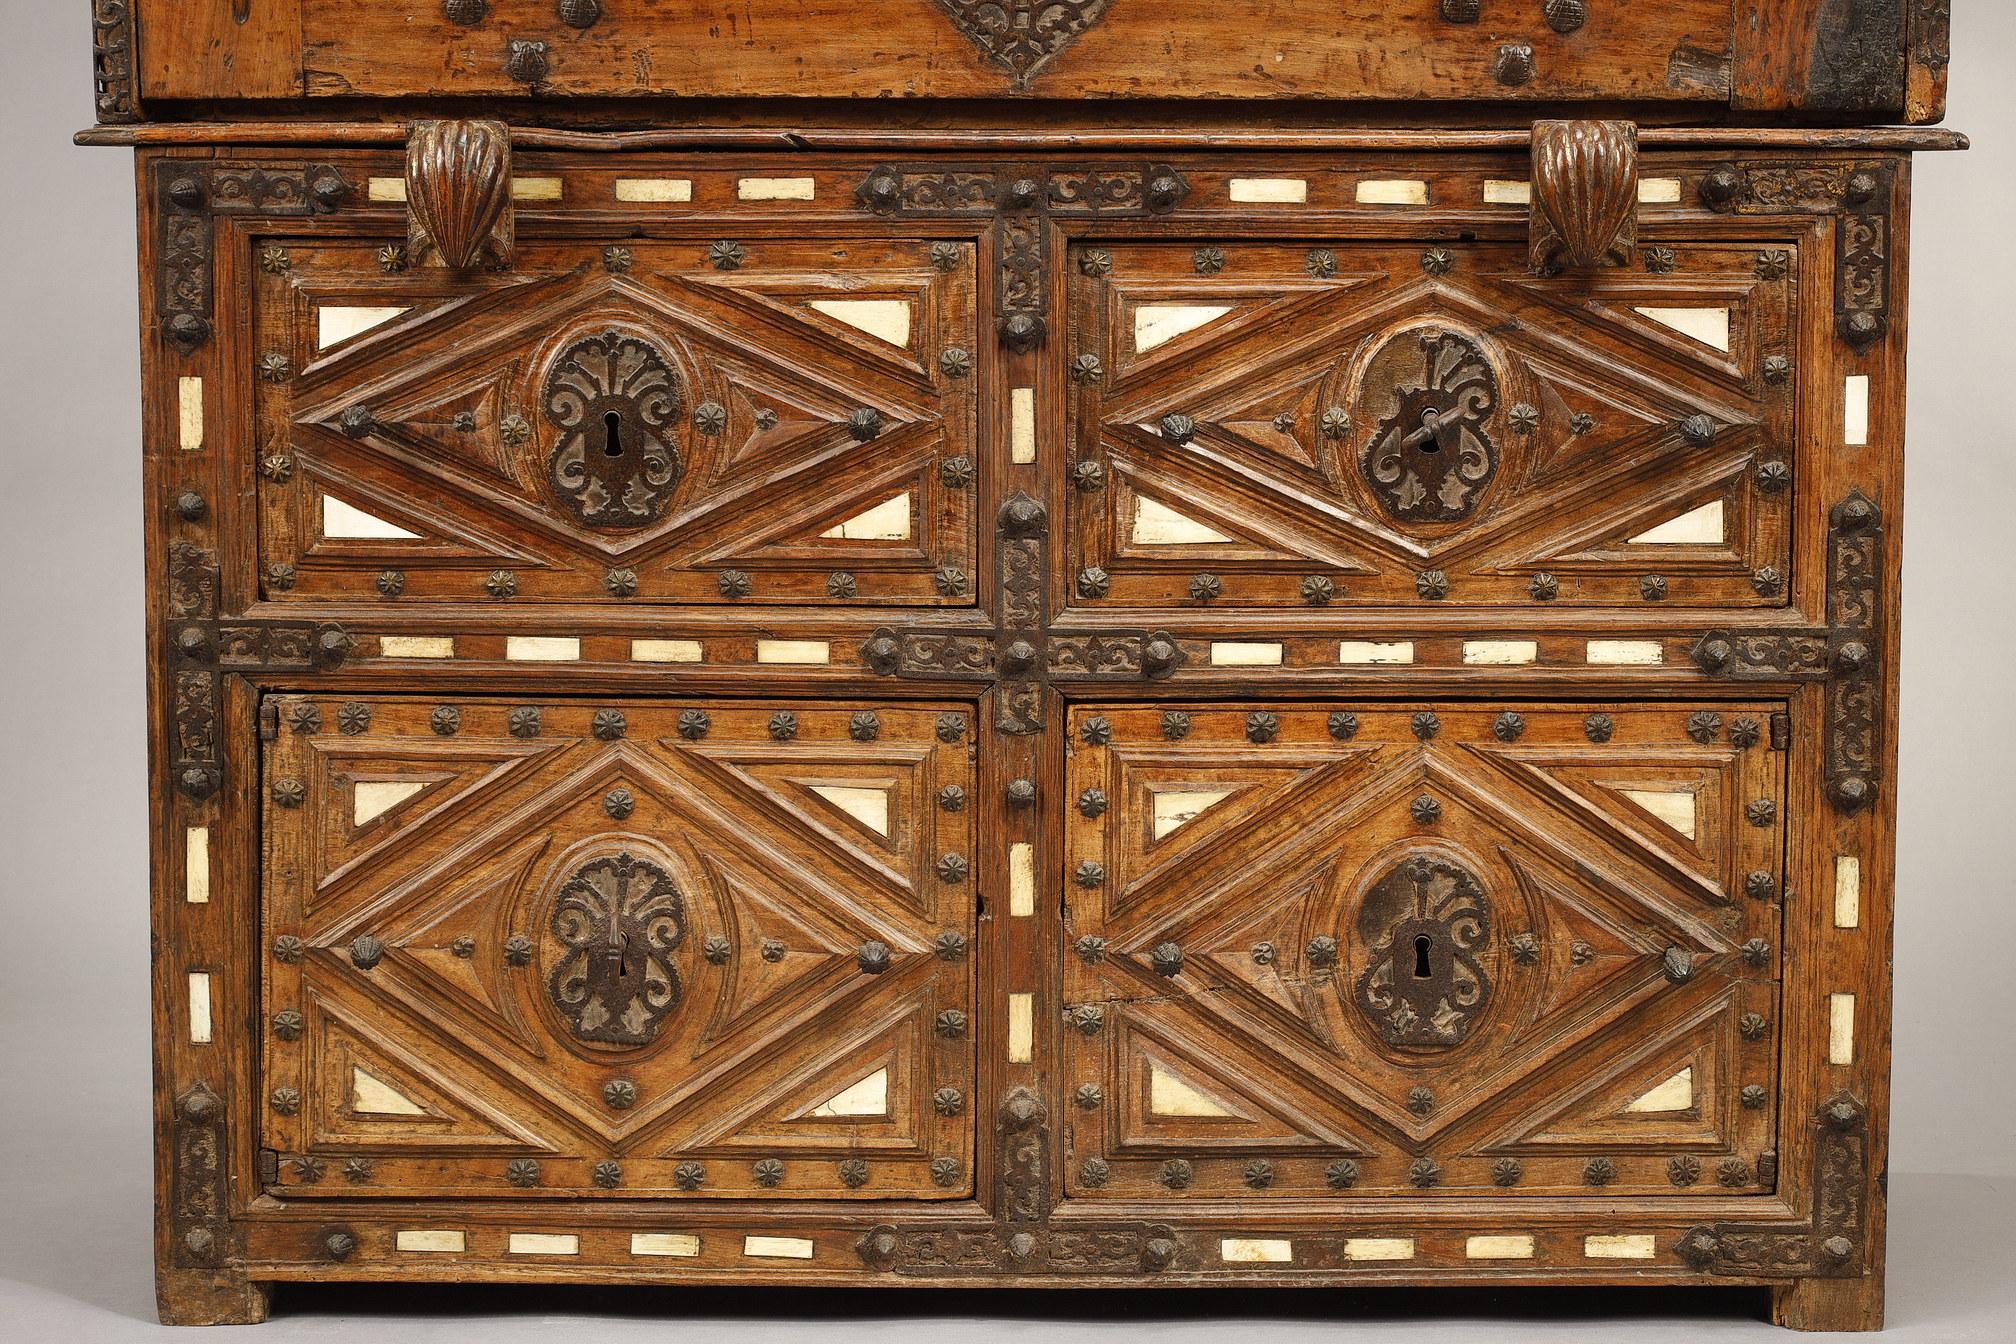 18th Century and Earlier 17th Century Spanish Bargueno and Taquillon in Walnut and Bone Marquetry